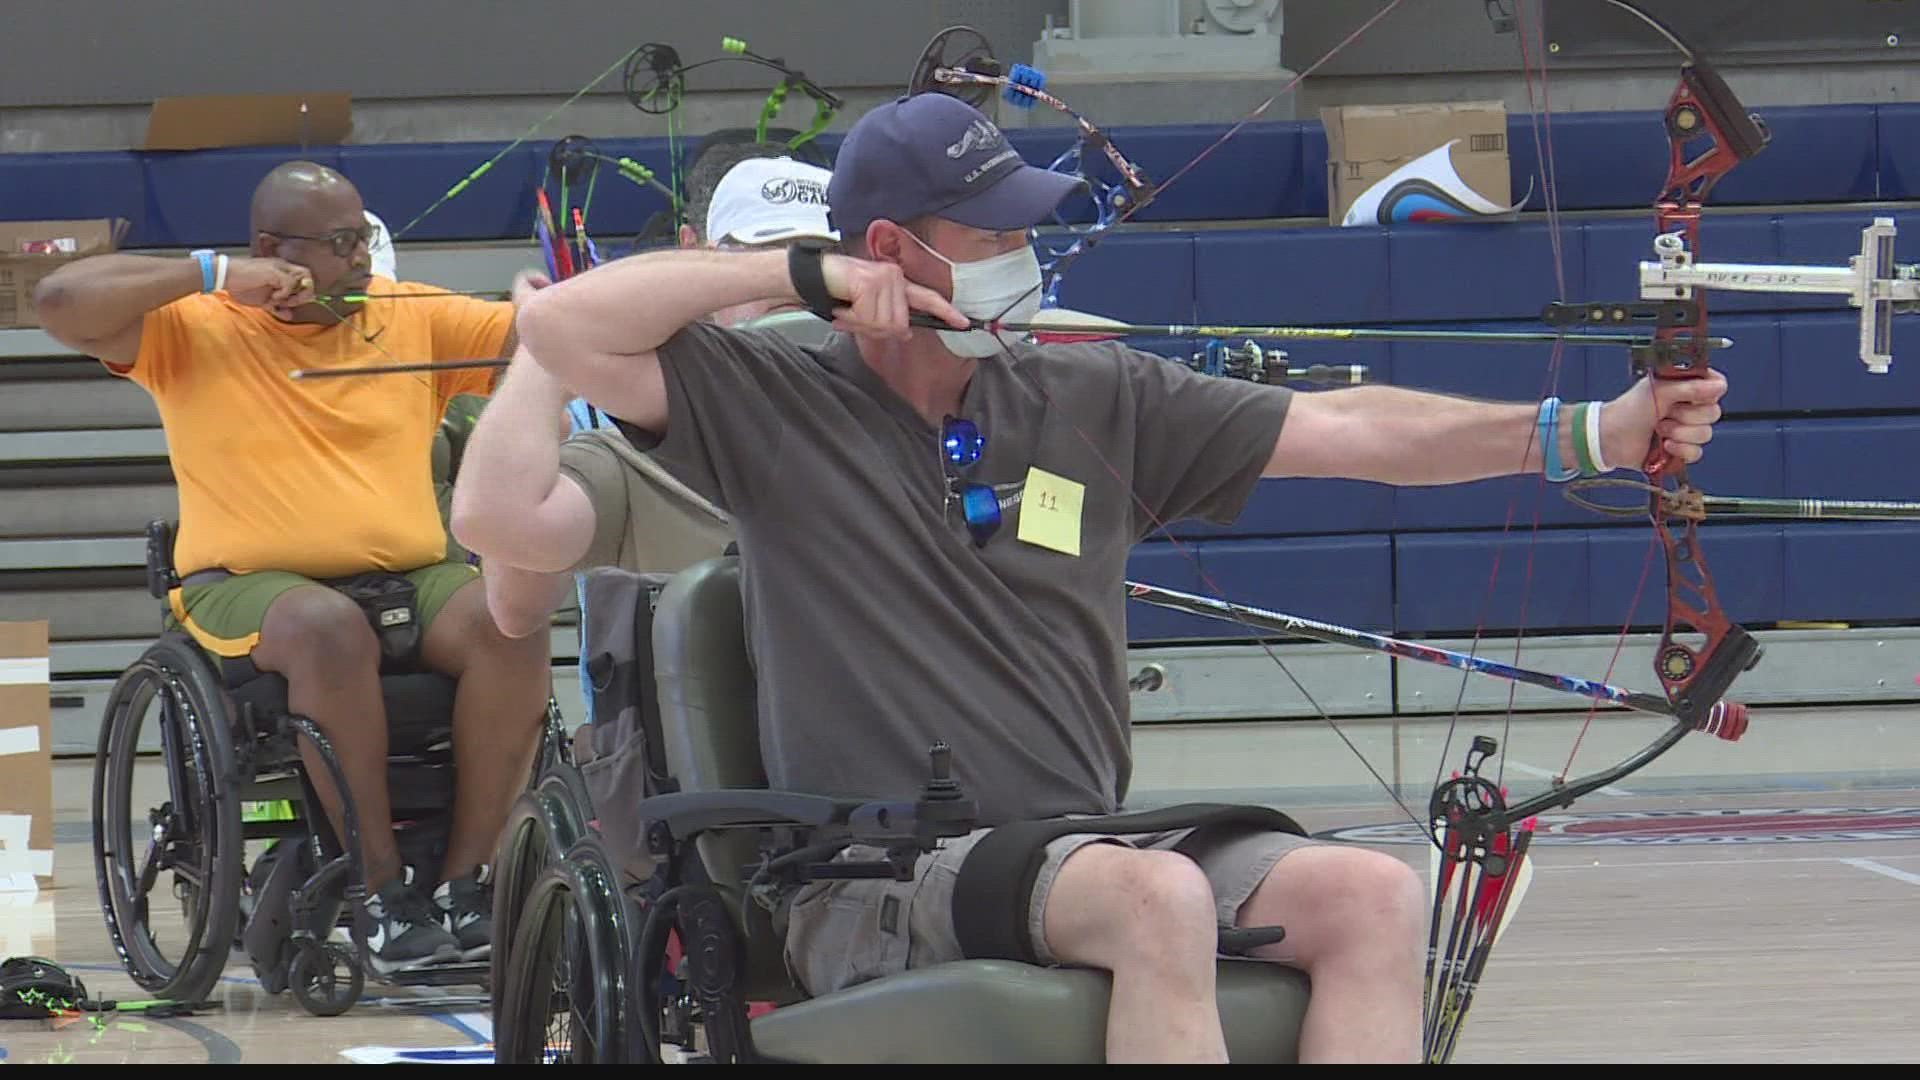 The 41st National Wheelchair Games is giving veterans who are wheelchair-bound the opportunity to spend time with others who face the same challenges.